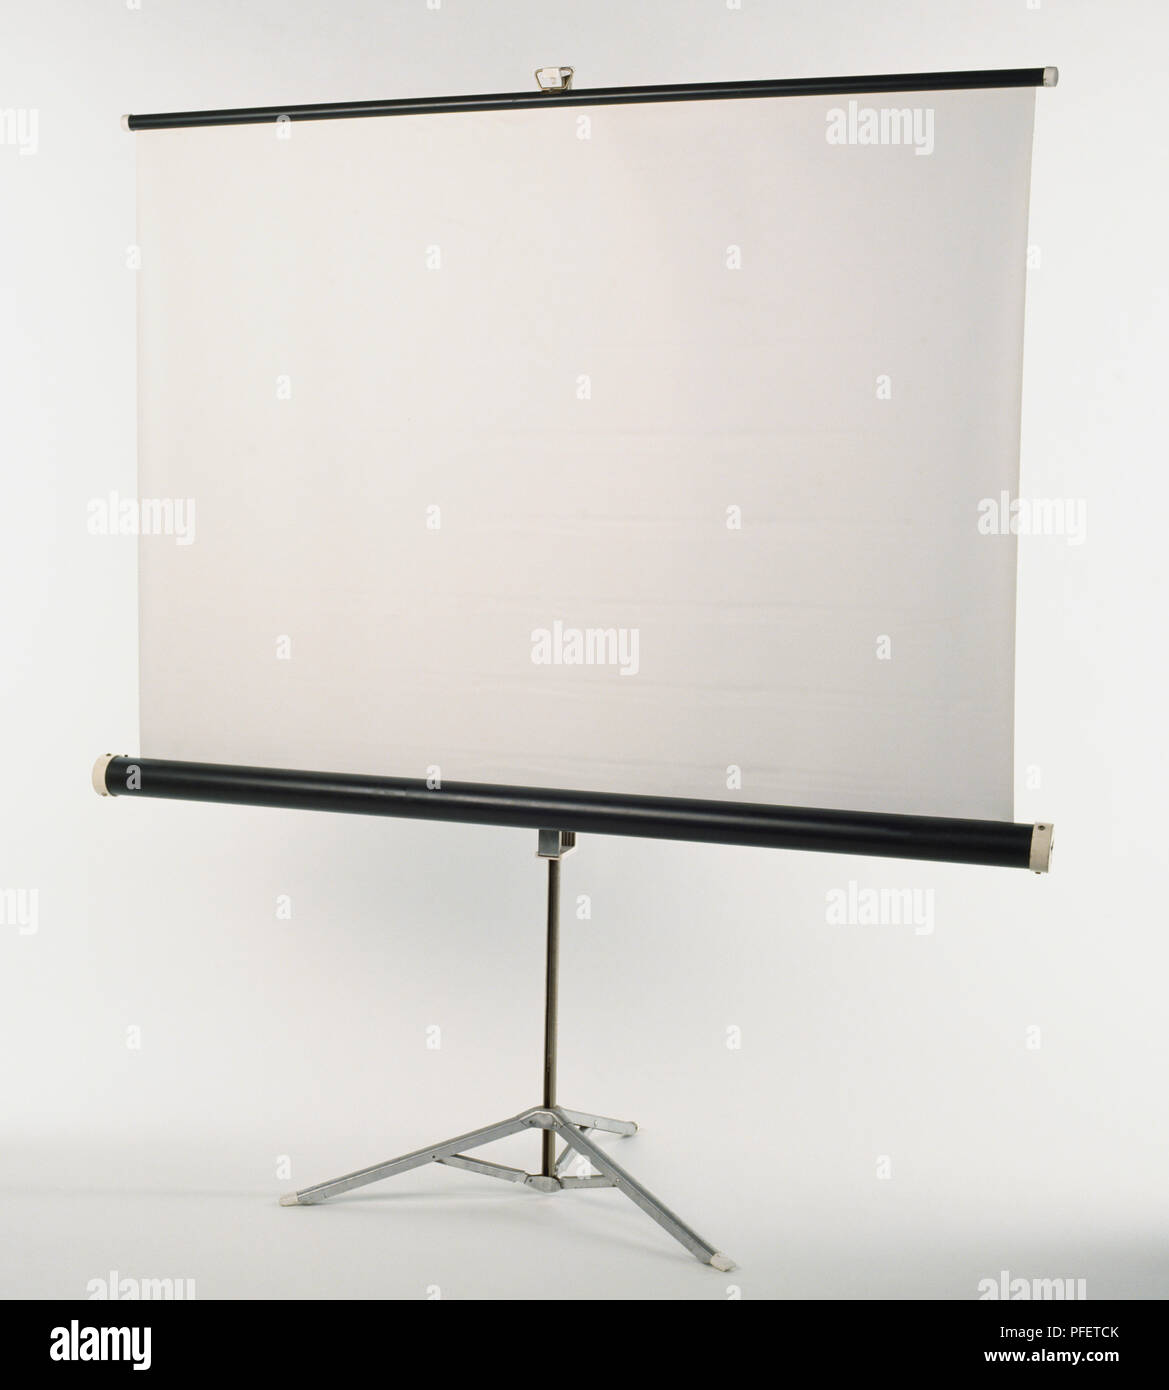 A white projector screen on a stand. Stock Photo